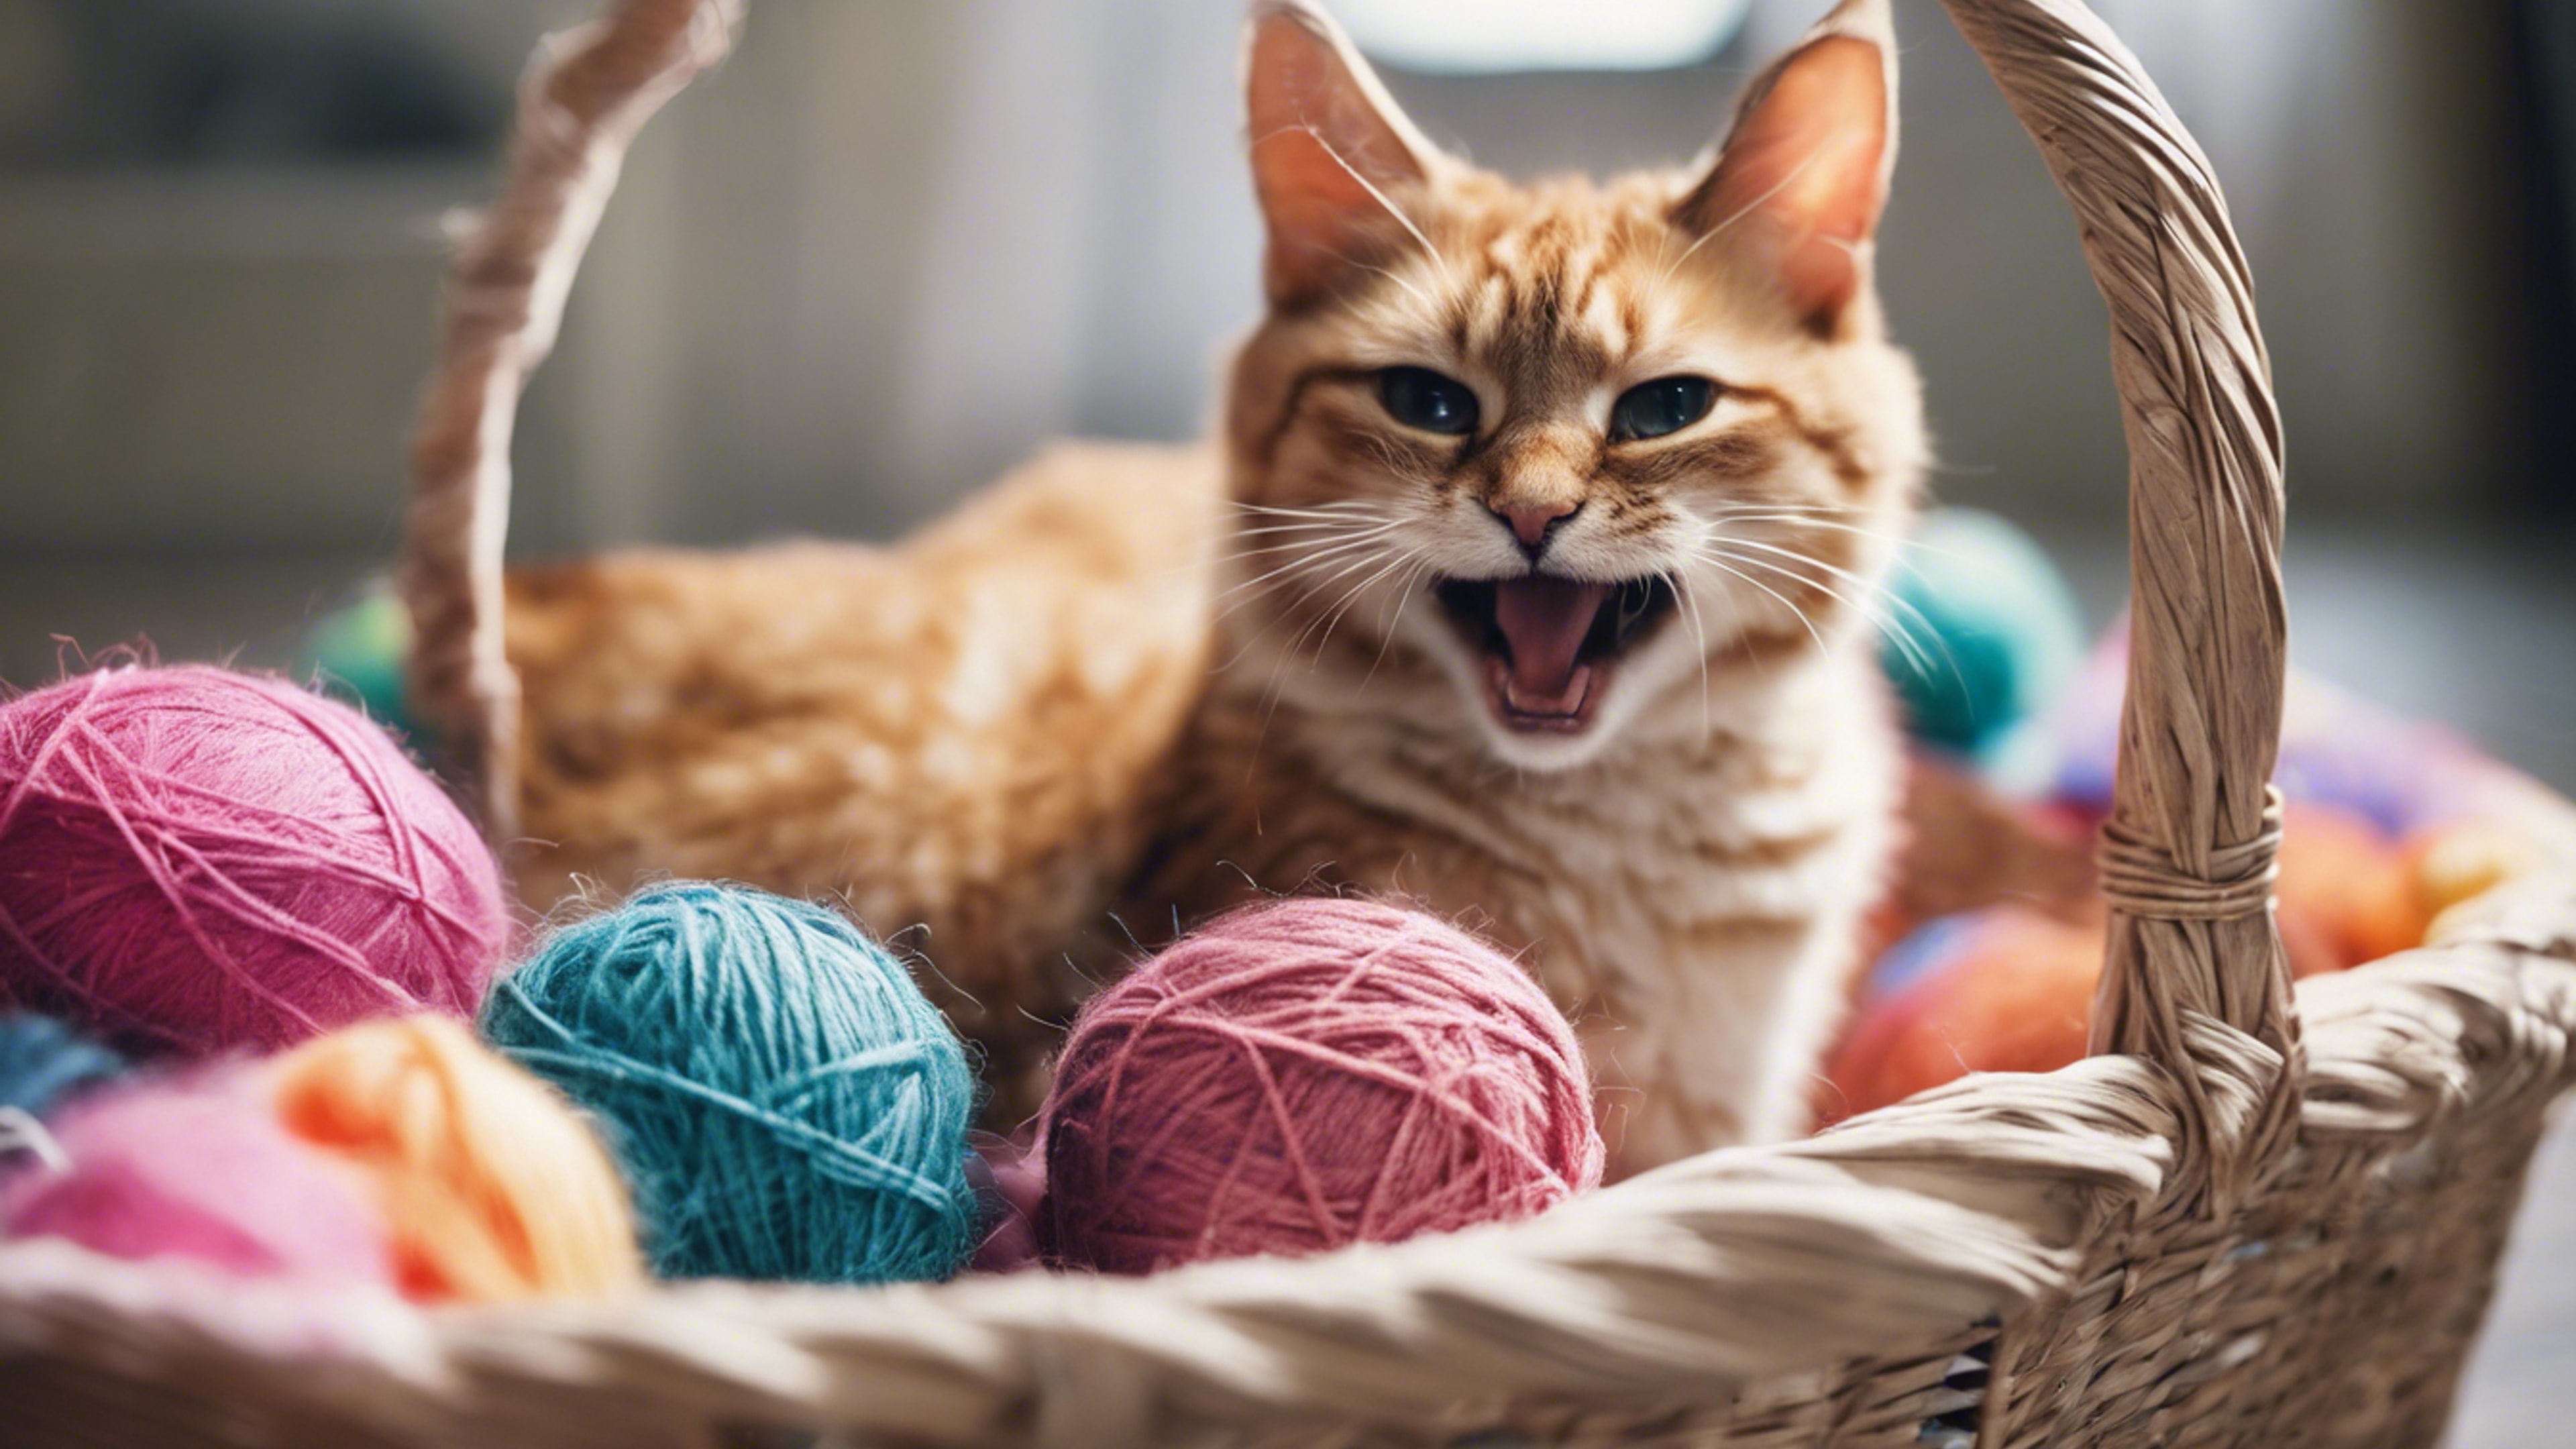 A cat mid-yawn in a basket filled with soft, colorful balls of yarn. Tapet[4de2b2f4a75d42f7bbf8]